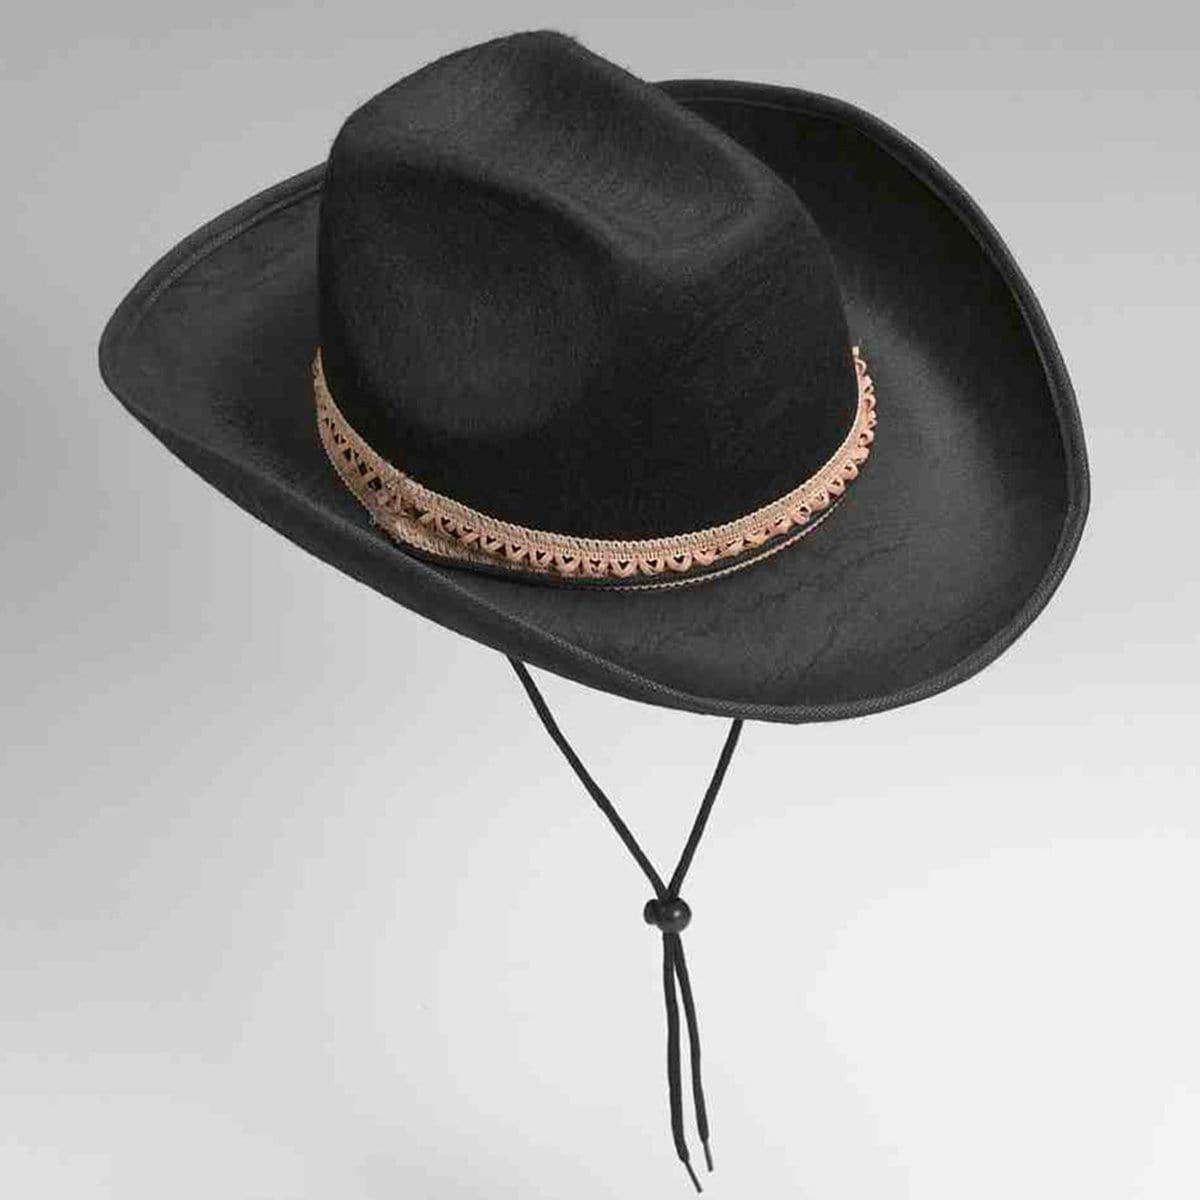 Buy Costume Accessories Black felt cowboy hat for adults sold at Party Expert